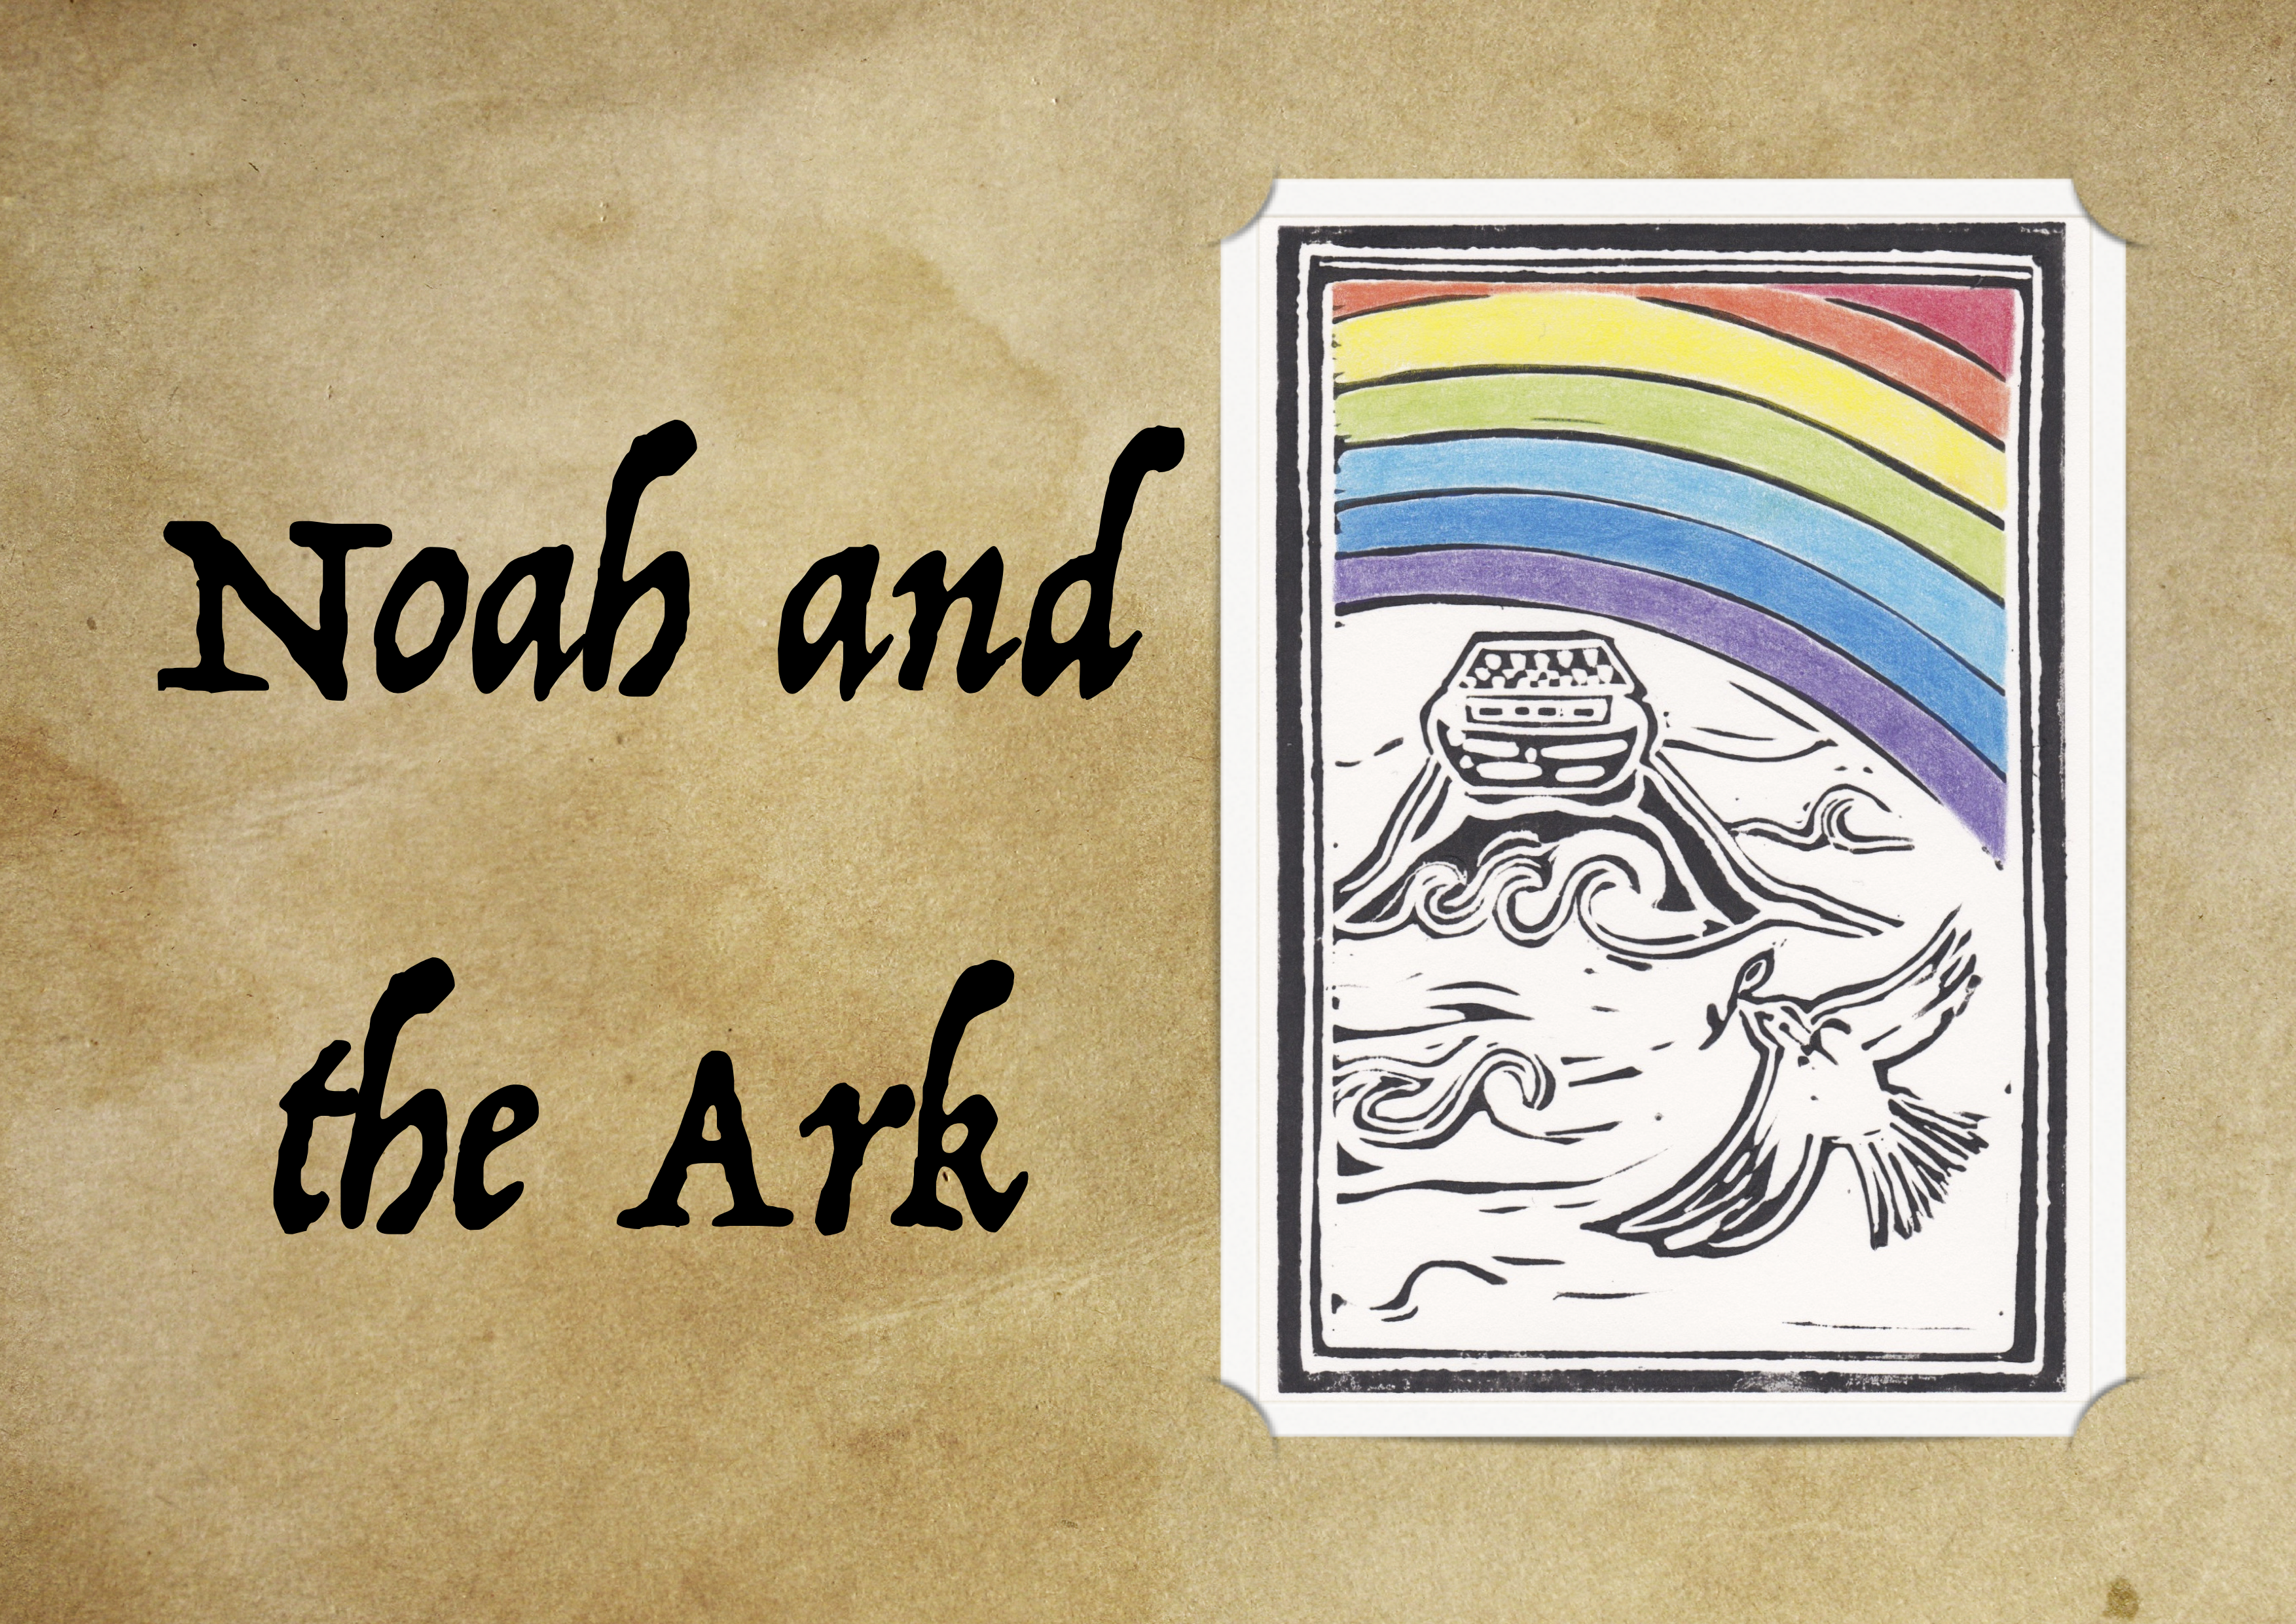 "Noah and the Ark" text with lino print illustration including coloured rainbow.